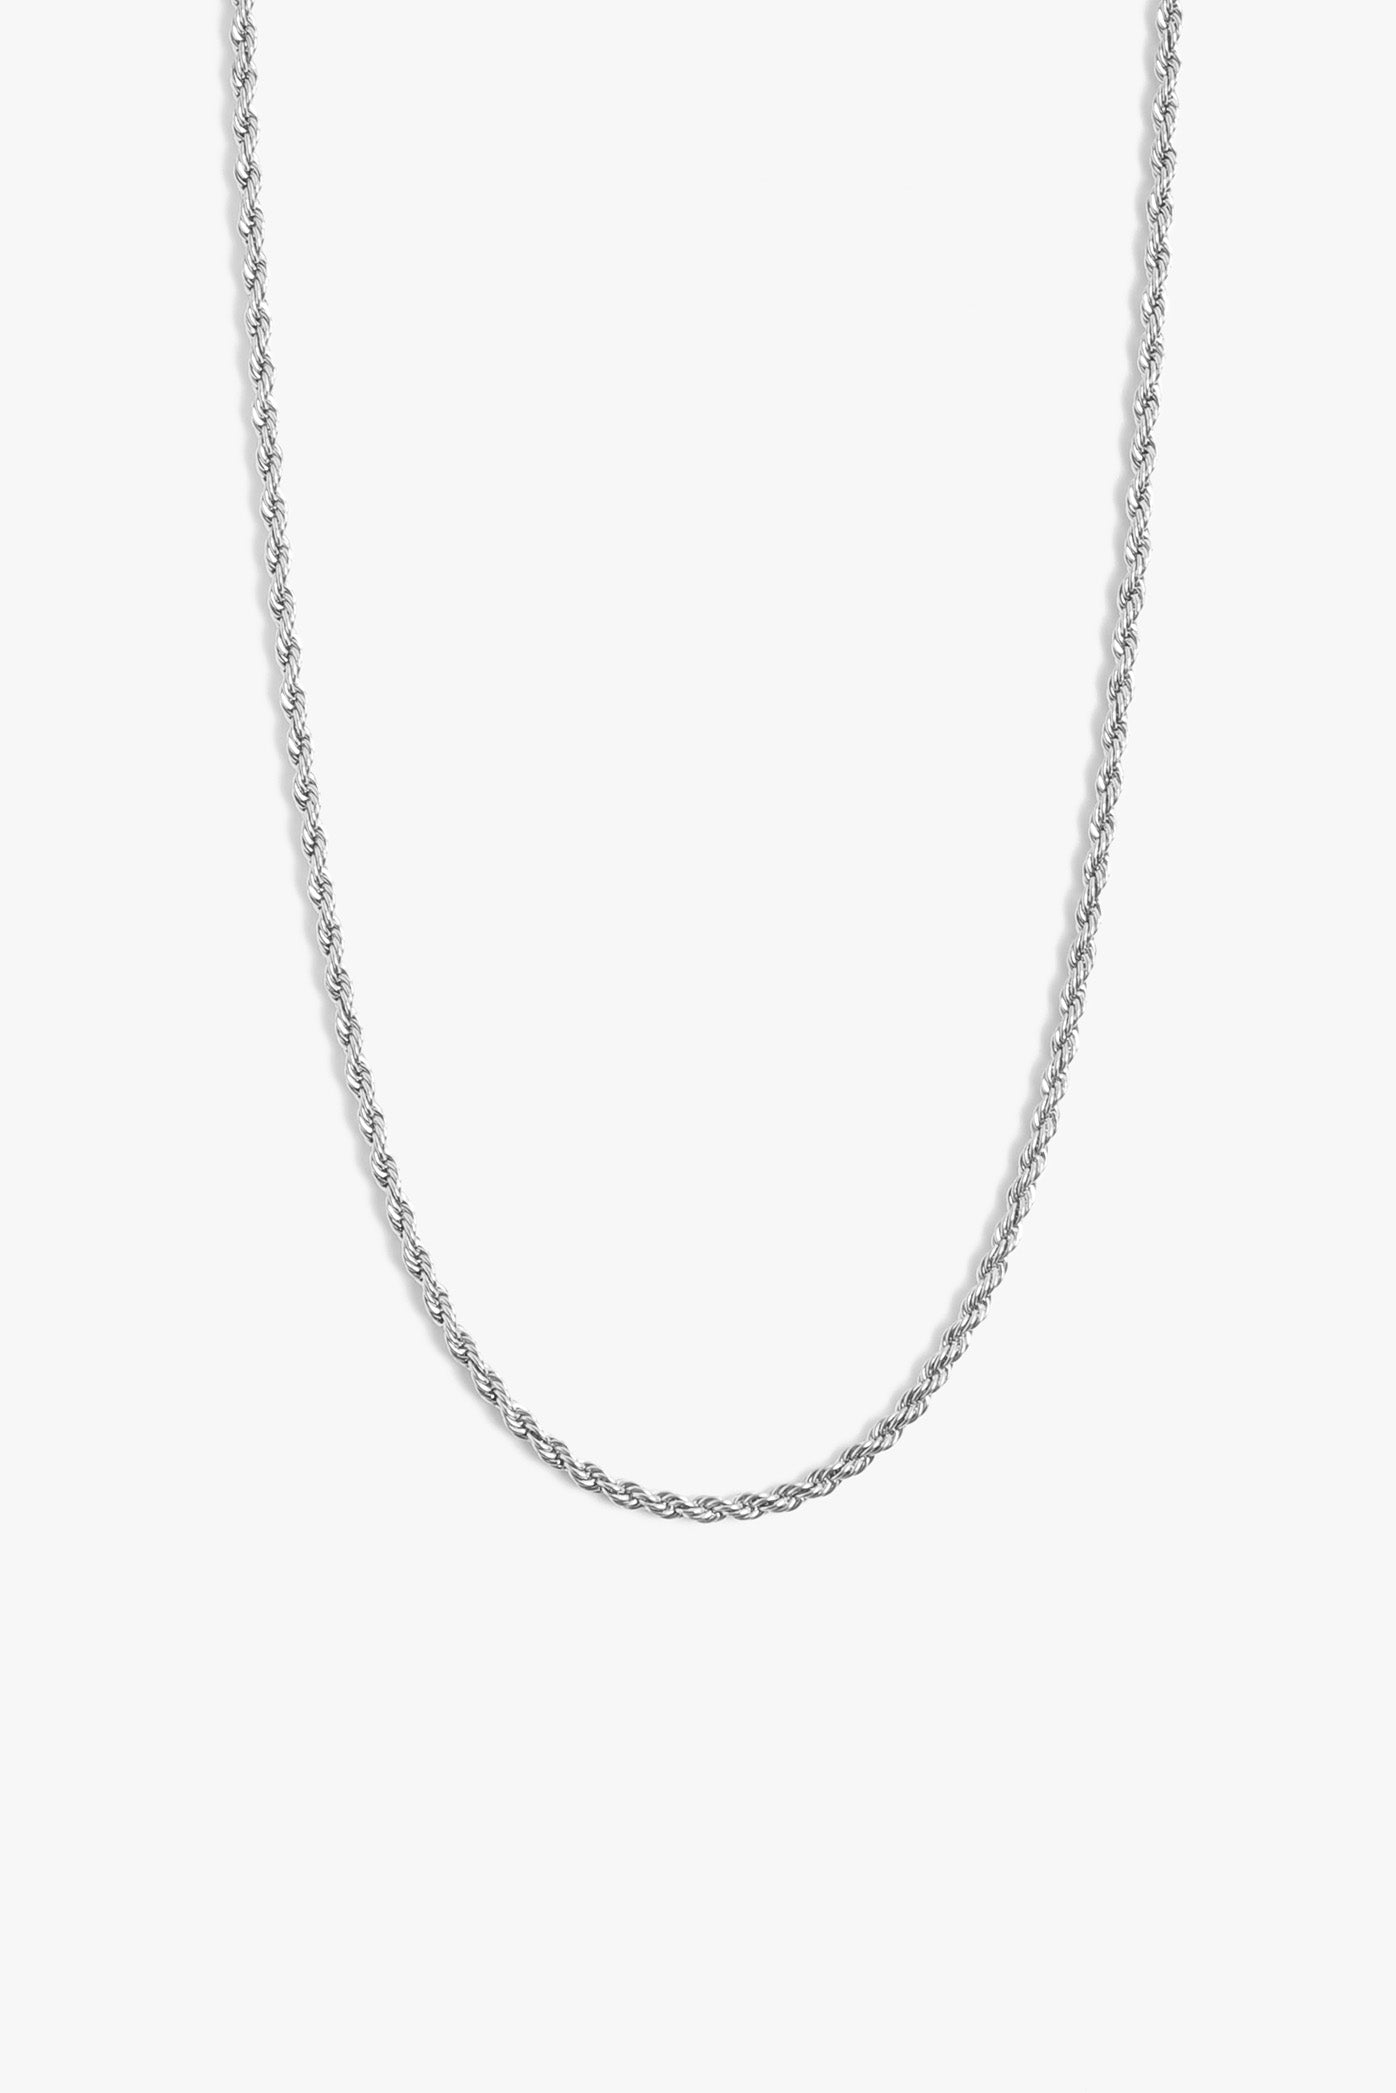 Marrin Costello Jewelry Helix 5mm Chain thick rope twist chain with lobster clasp closure and extender. Waterproof, sustainable, hypoallergenic. Polished stainless steel.